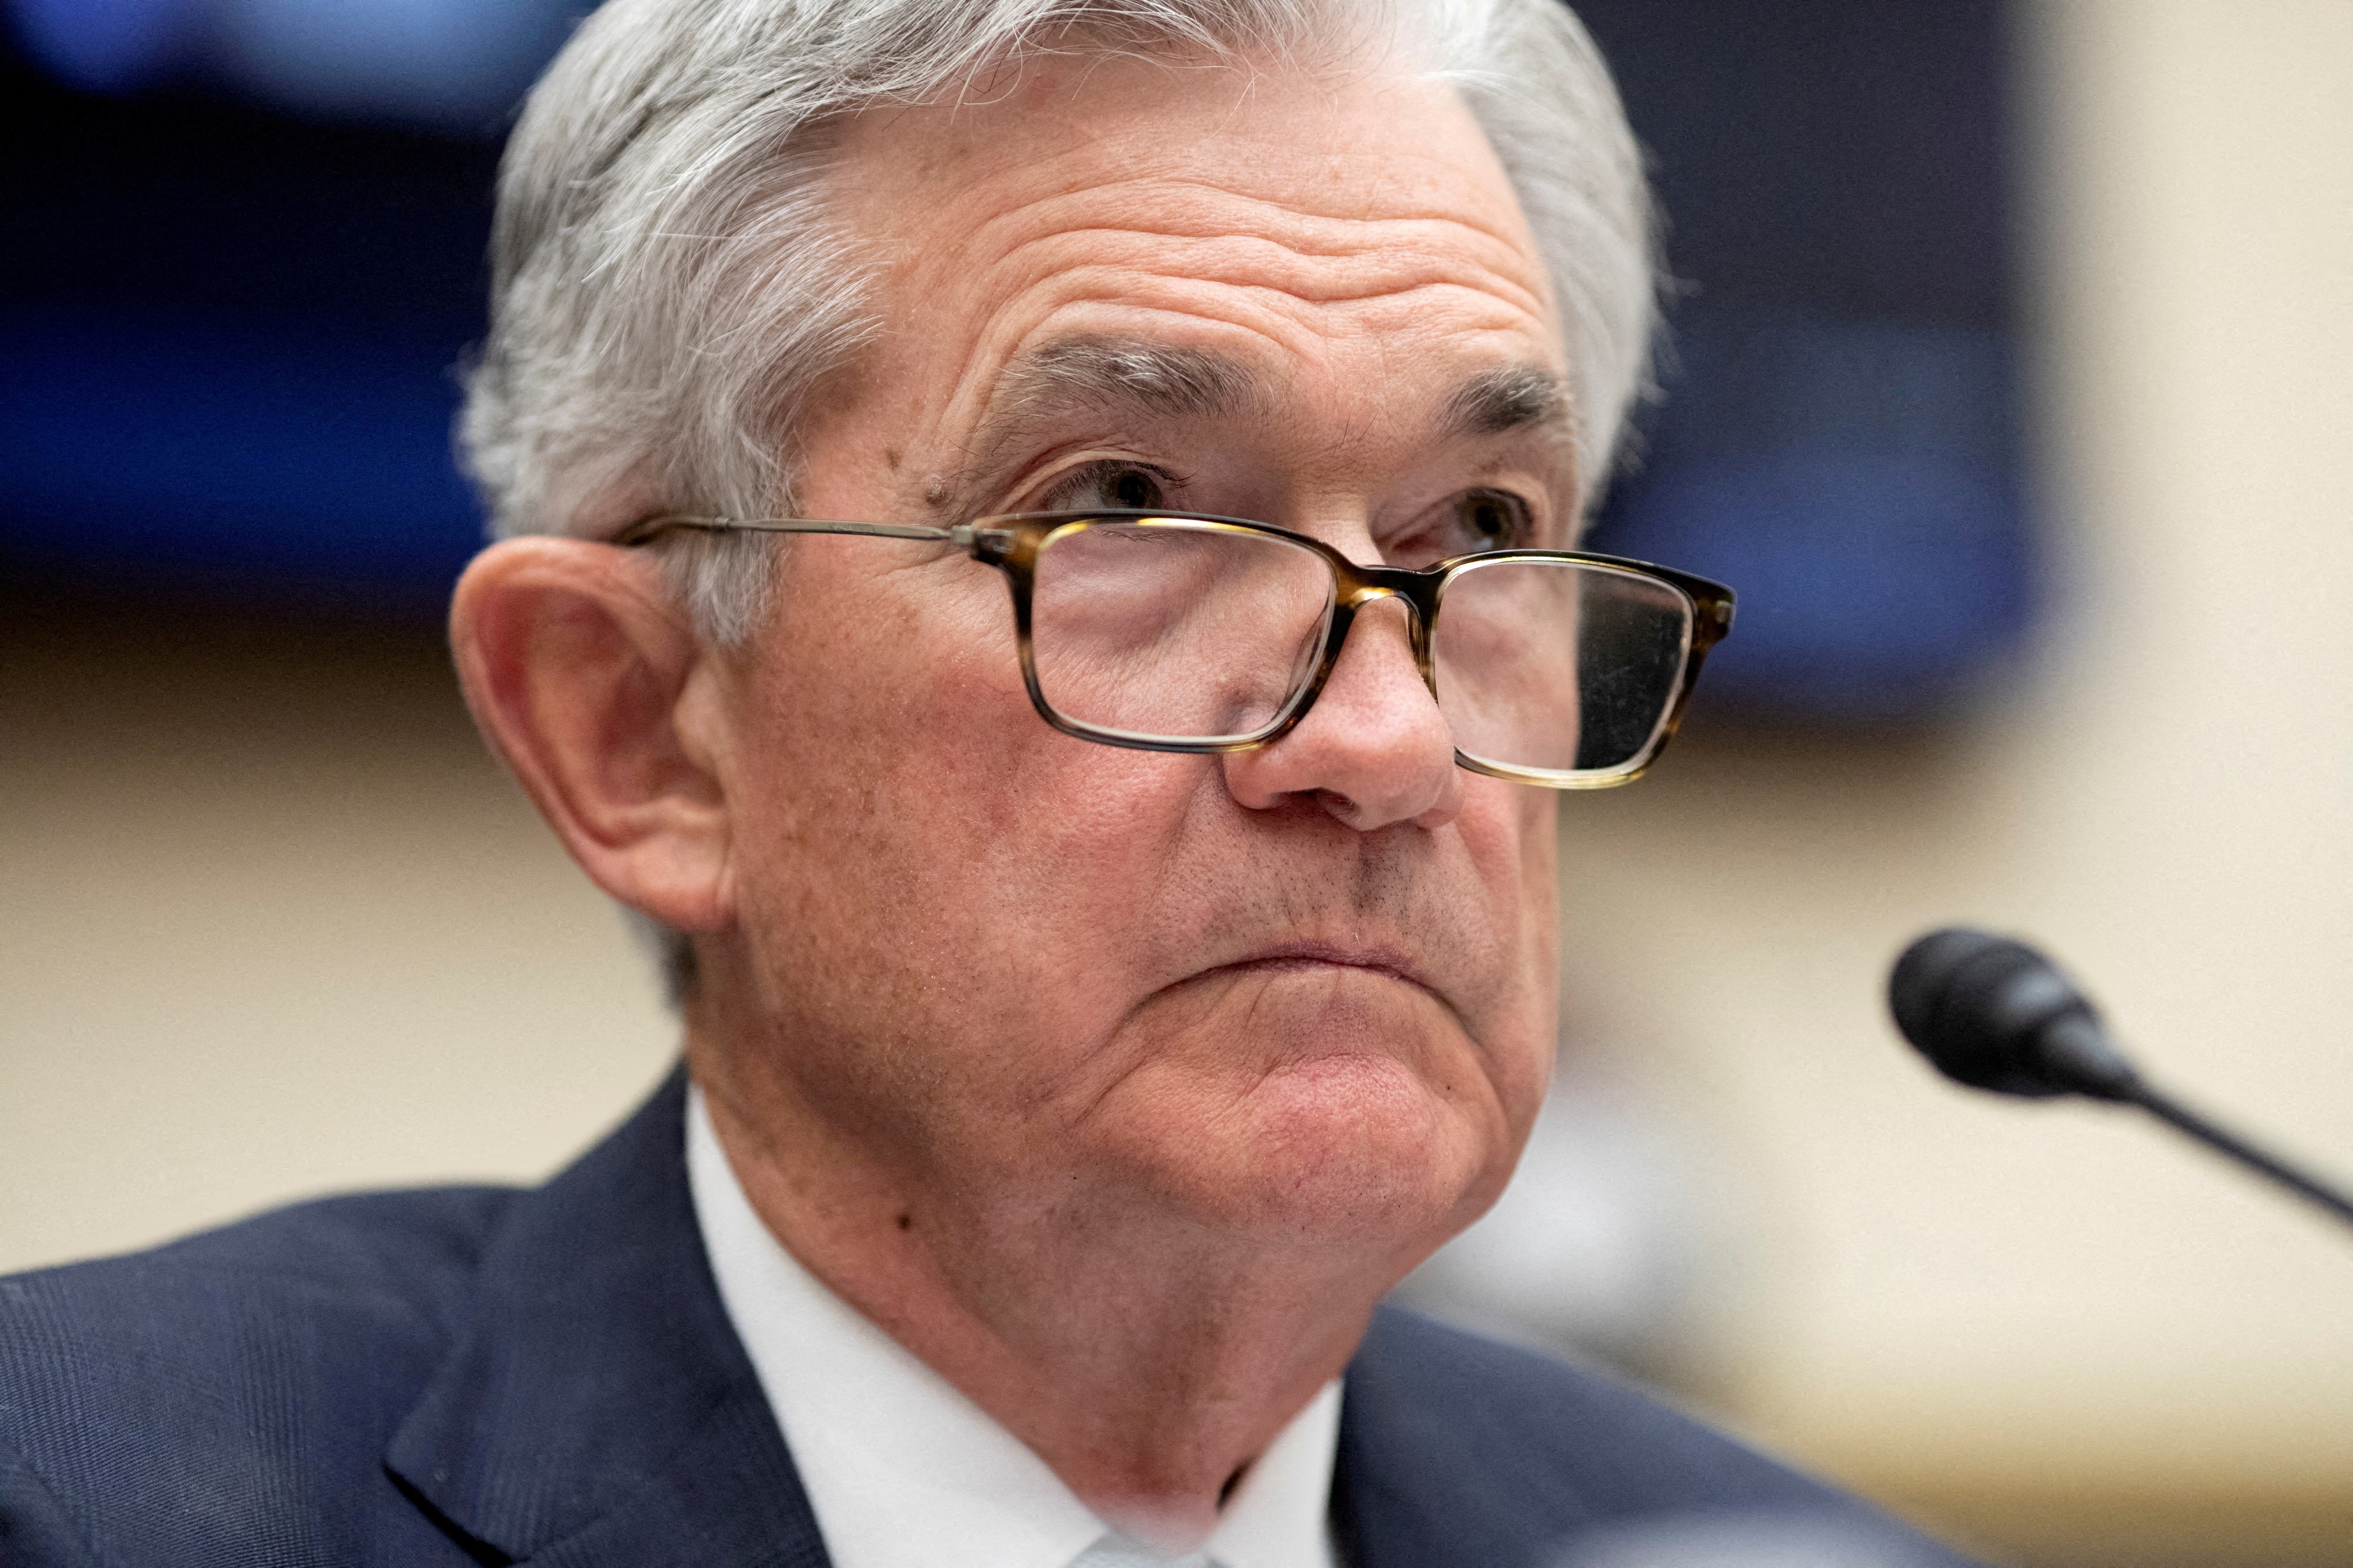 Federal Reserve Chair Jerome Powell testifies before a U.S. House Financial Services Committee hearing on Capitol Hill in Washington